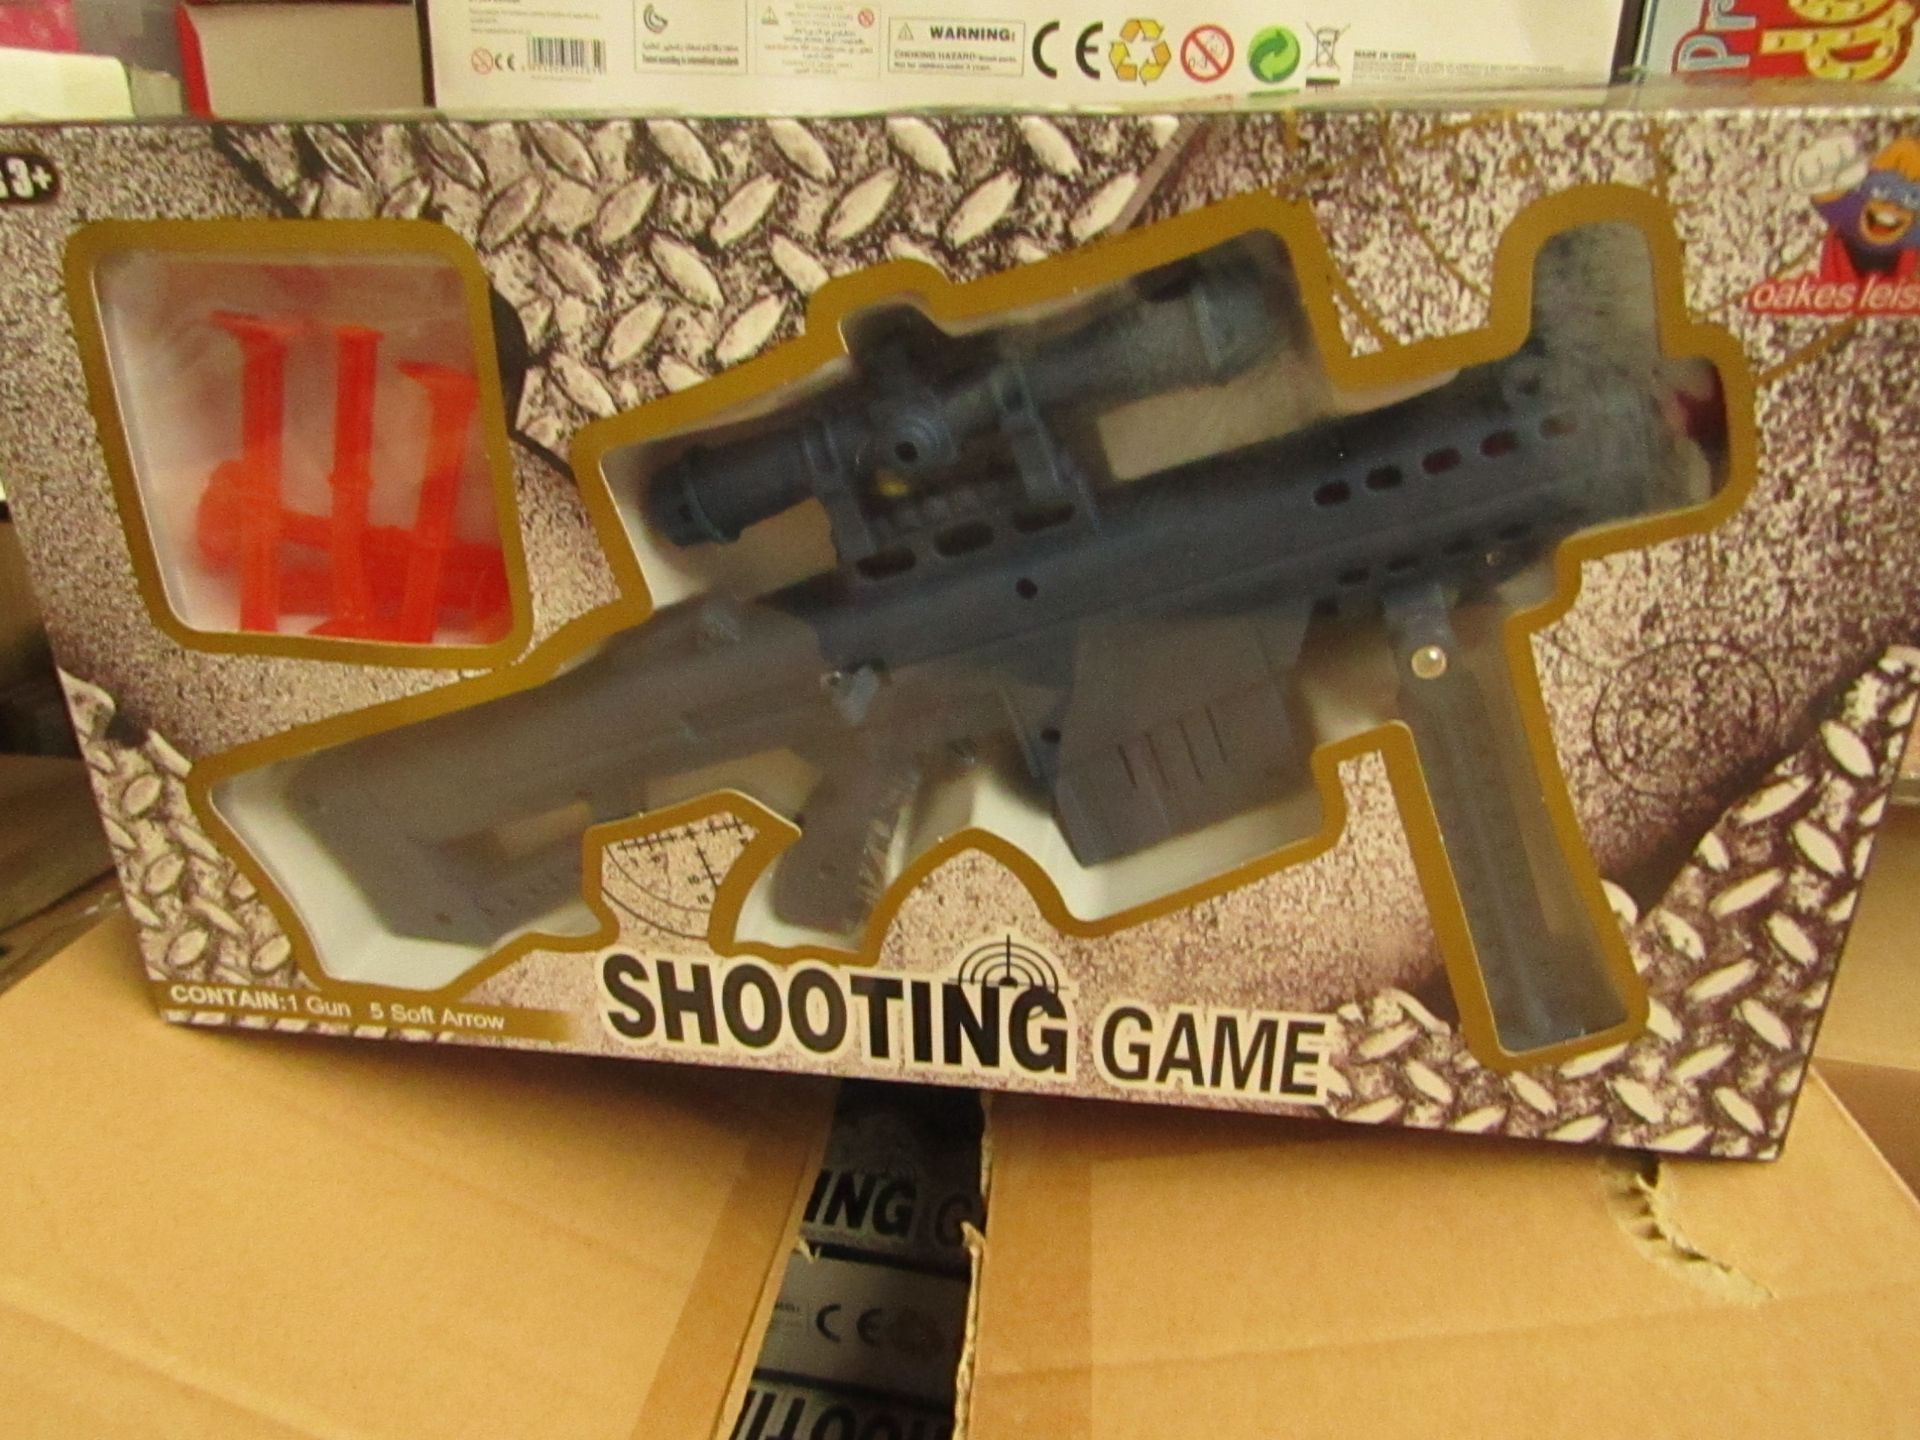 2x Safe Shooting Game, contains 1 Gun, 5 Soft Arrow (ages 3+) - Boxed & Unchecked